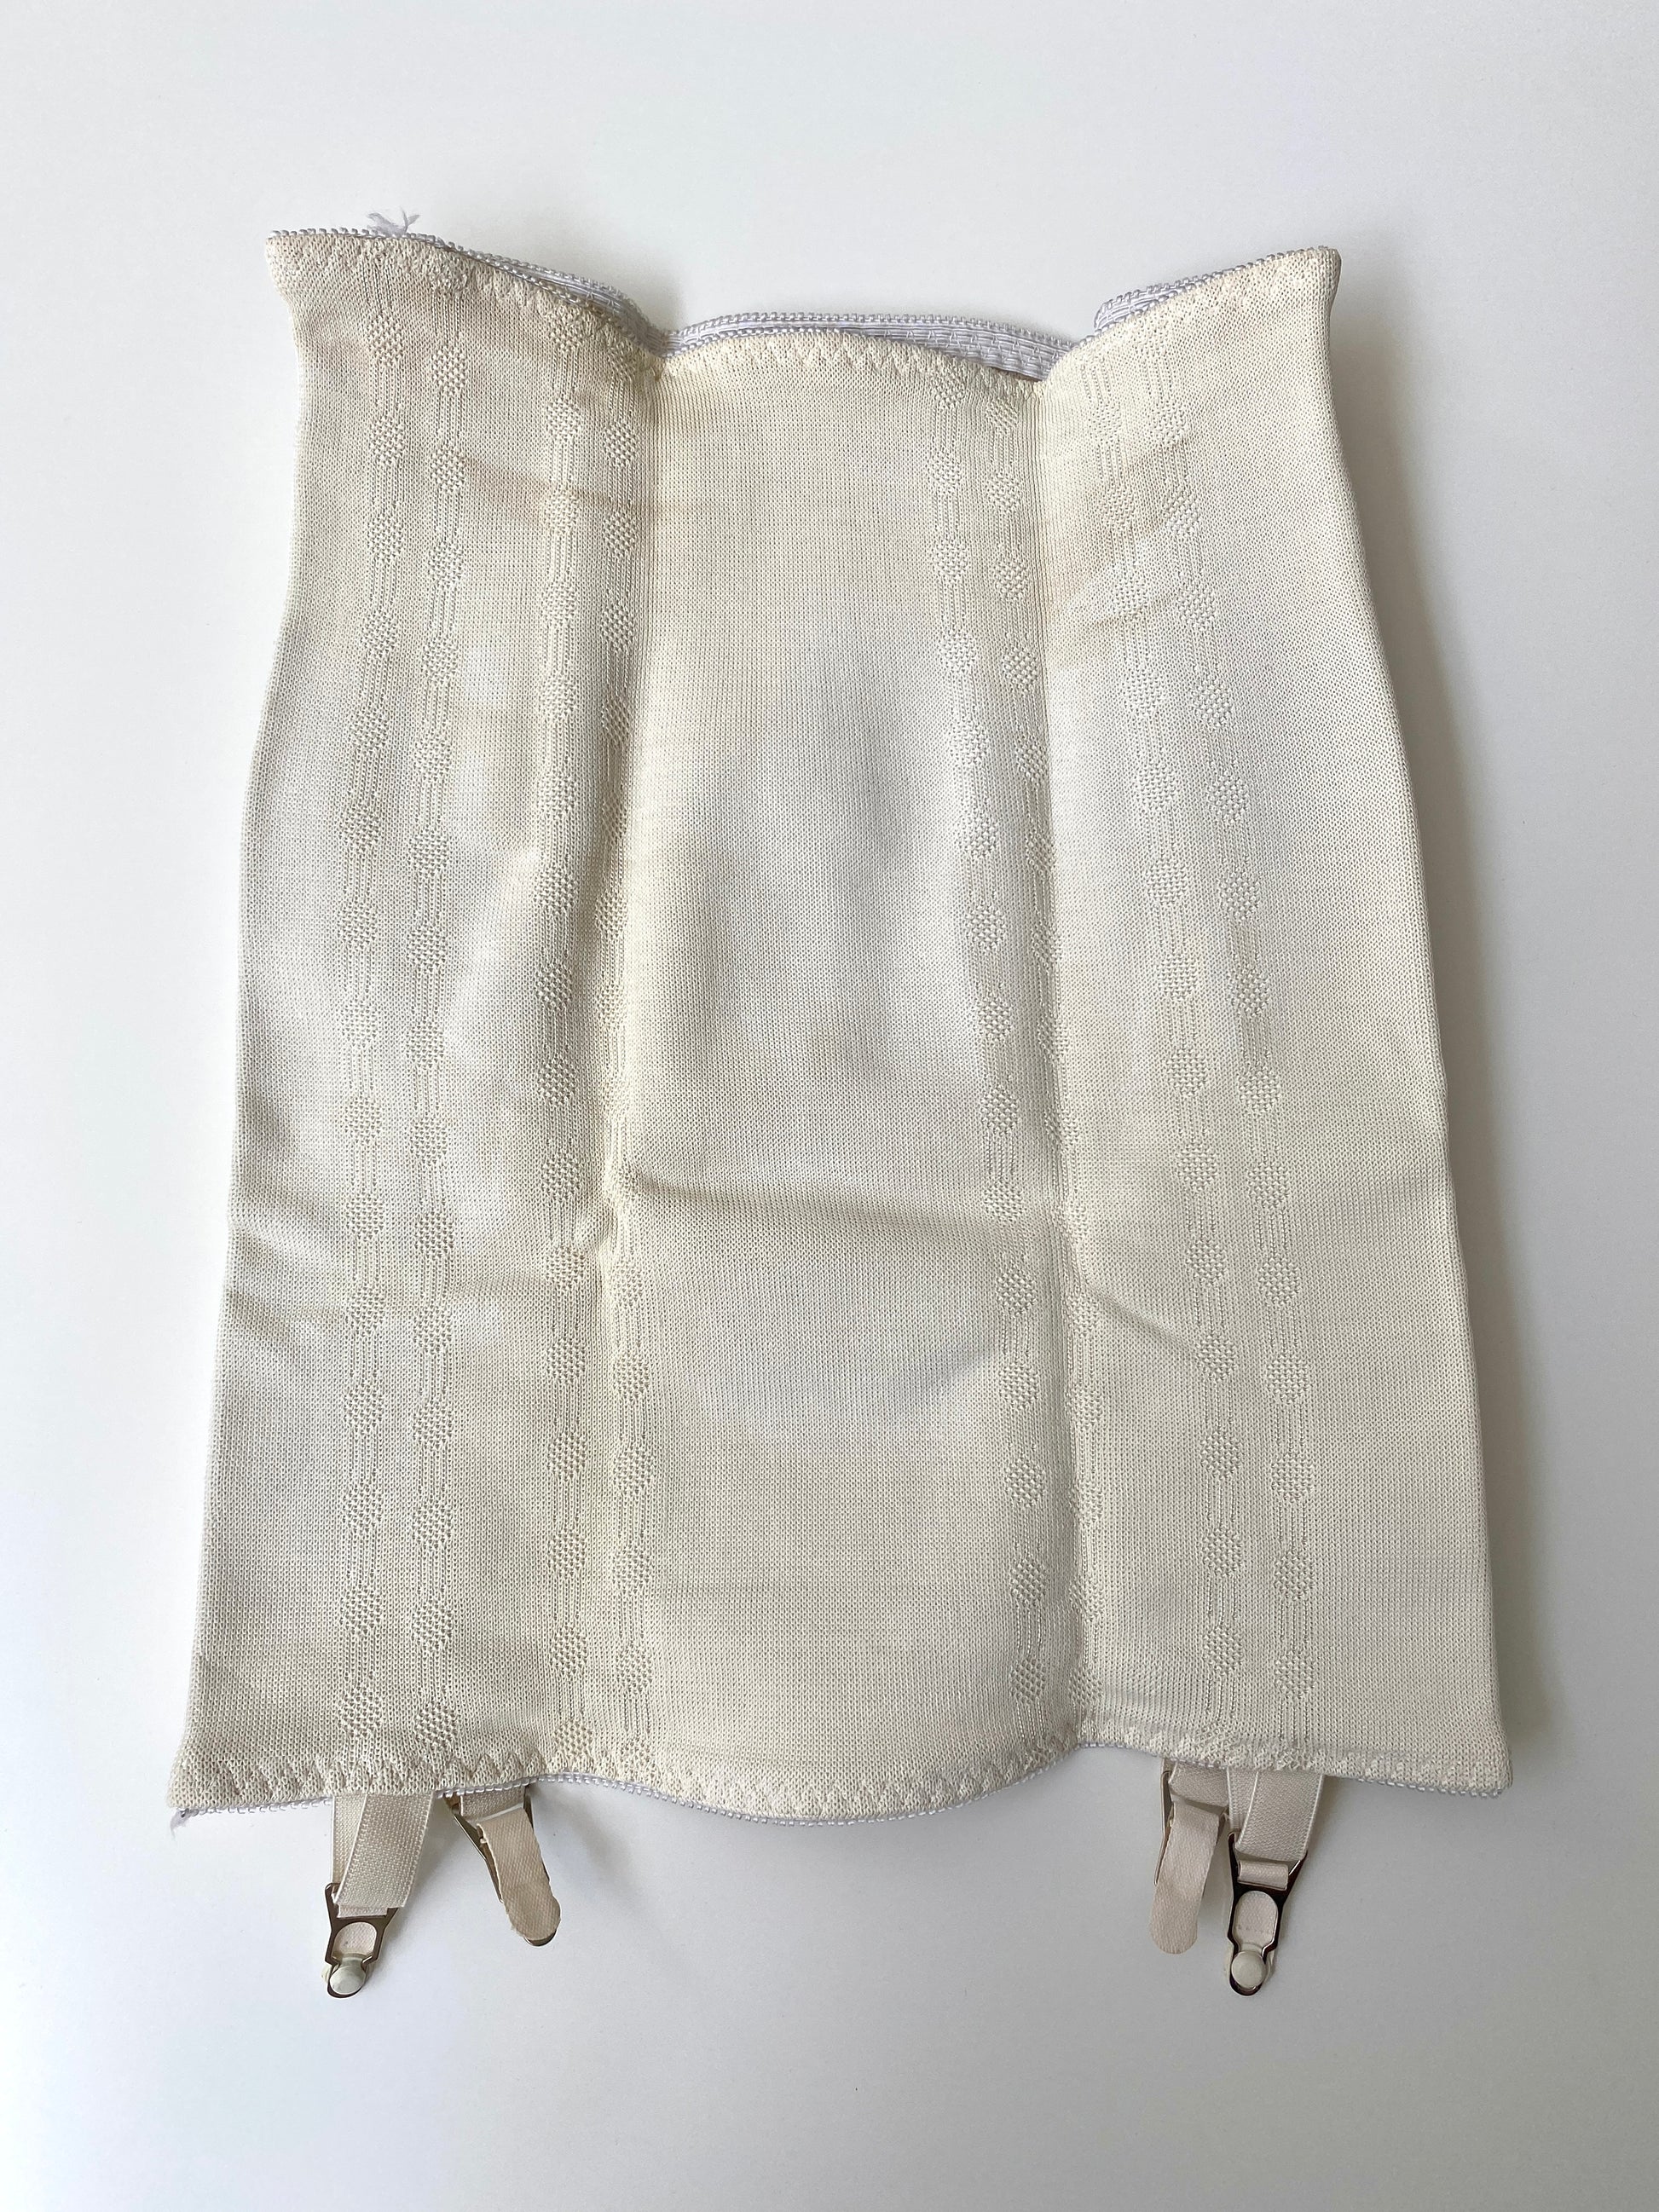 Vintage 1950's-60's ADOLA Brand Cream Ivory Girdle With Garters Size M